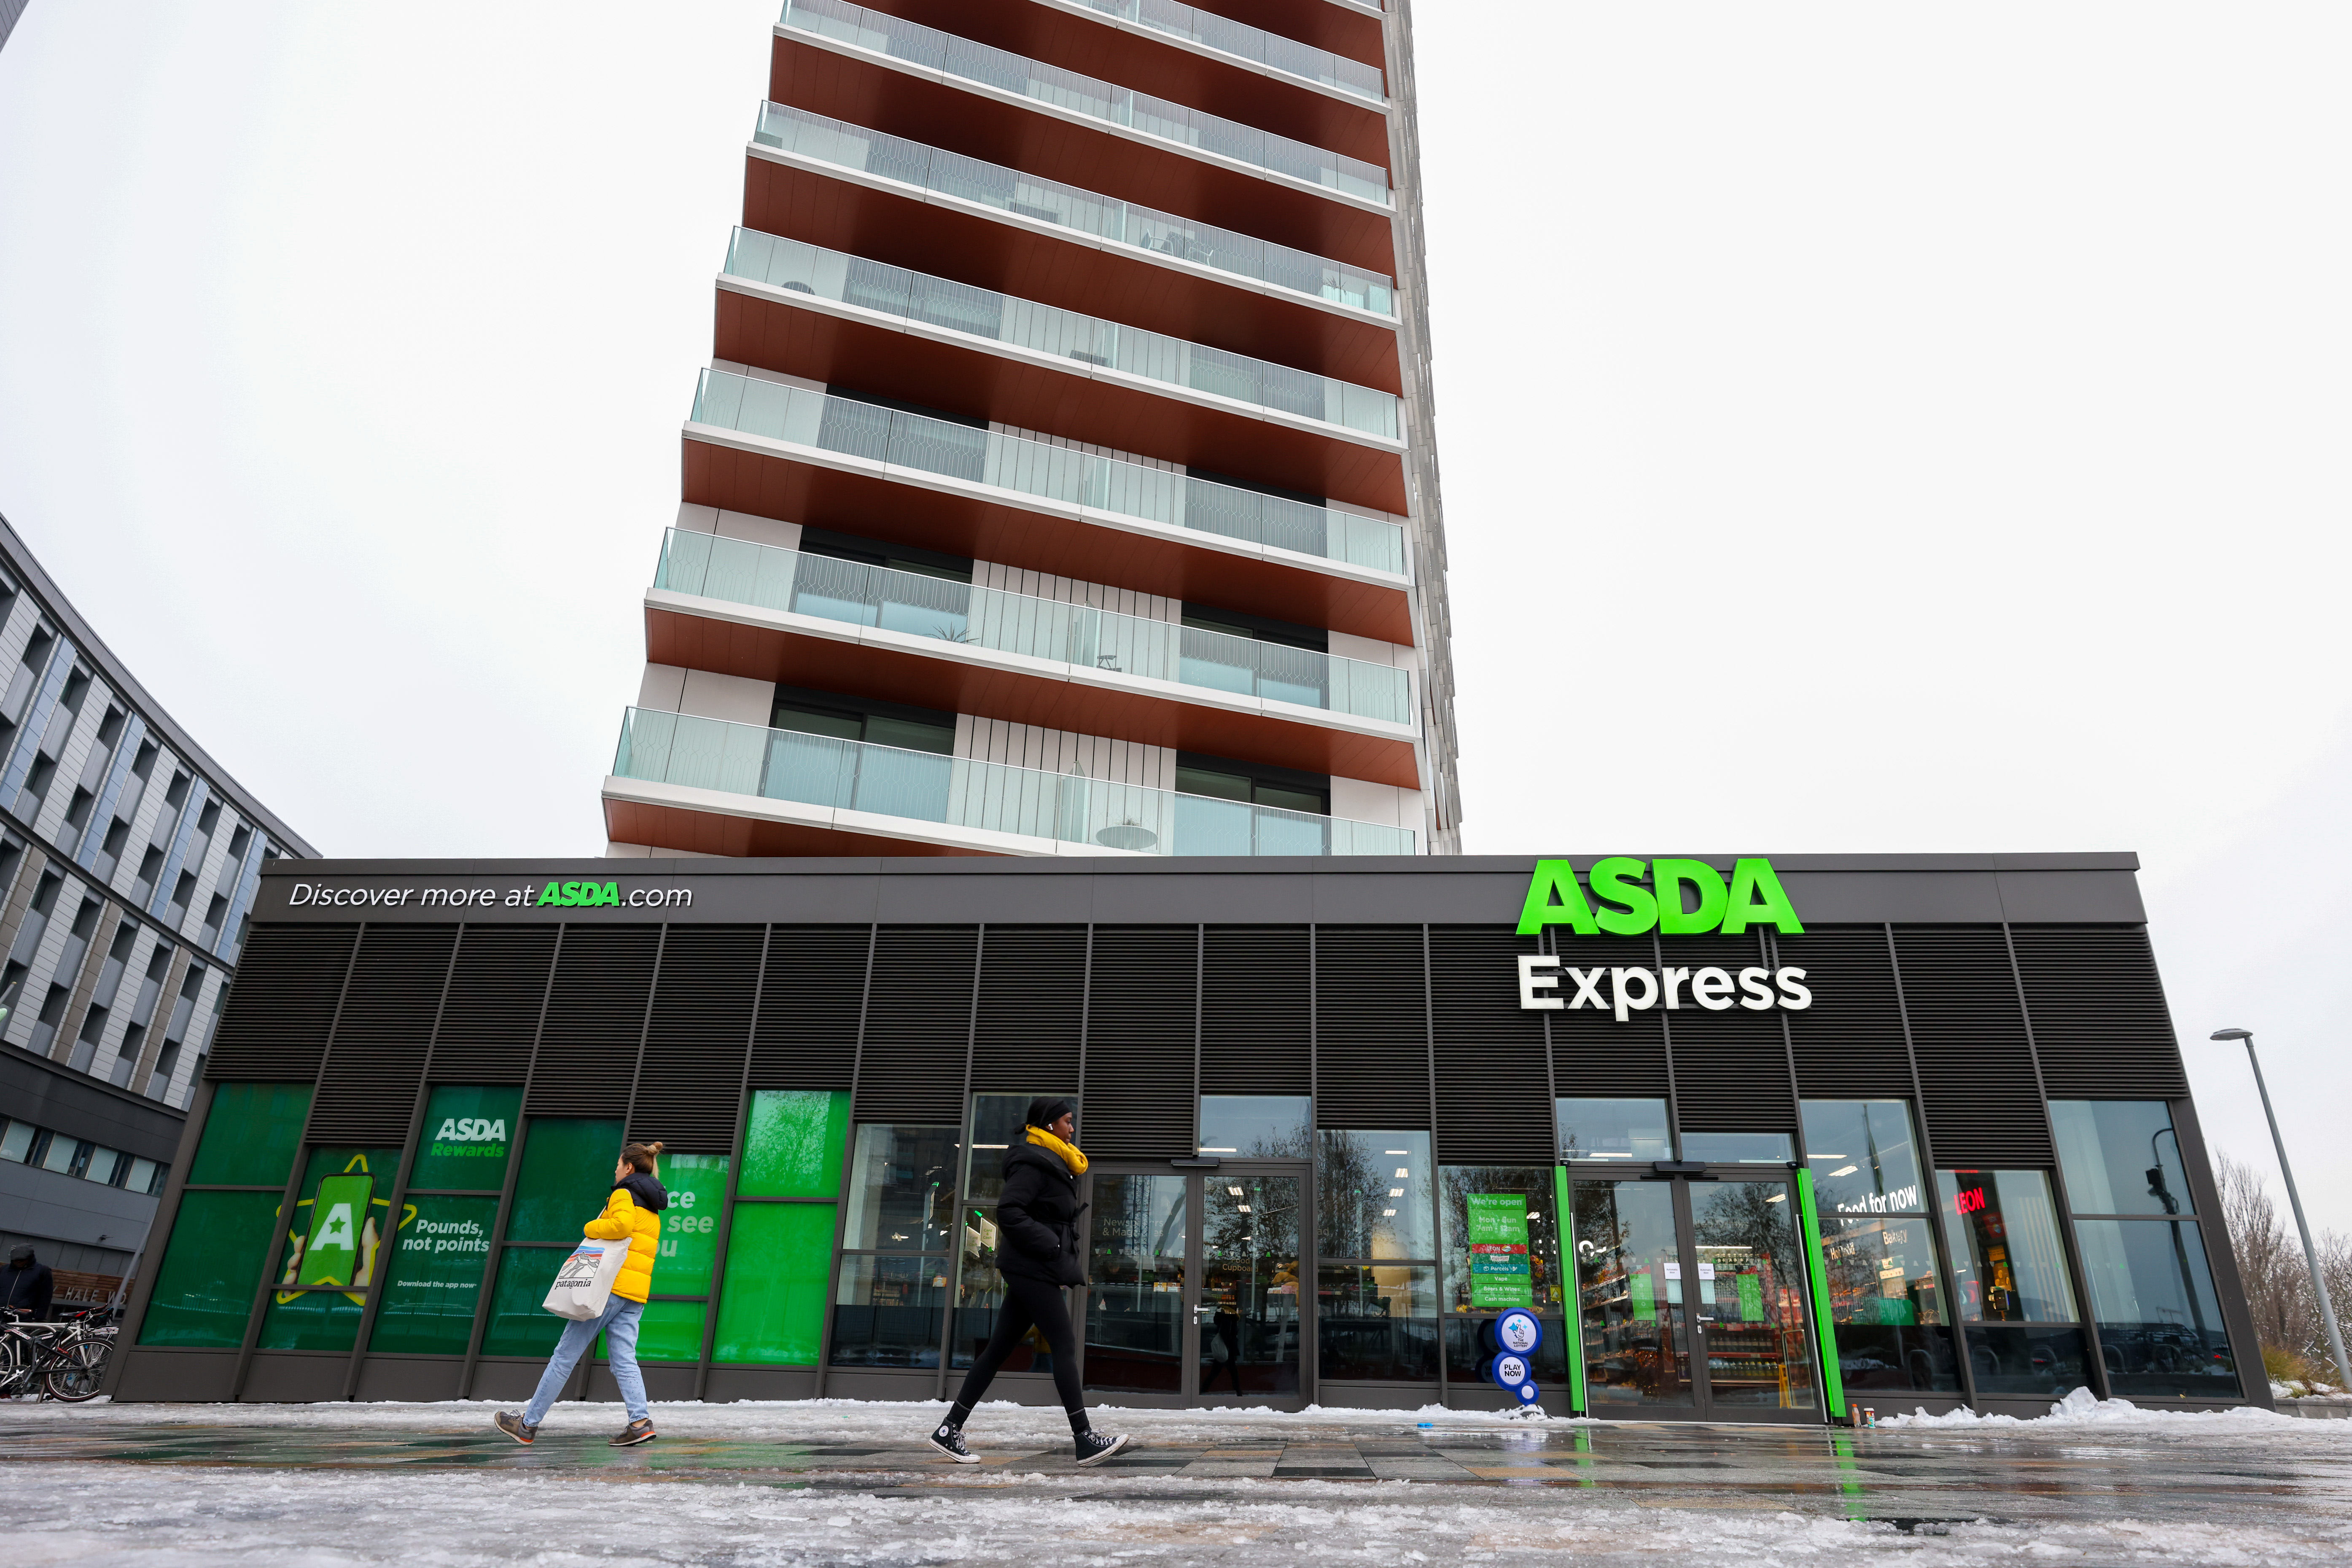 Asda has been opening hundreds of smaller format Express stores across the UK